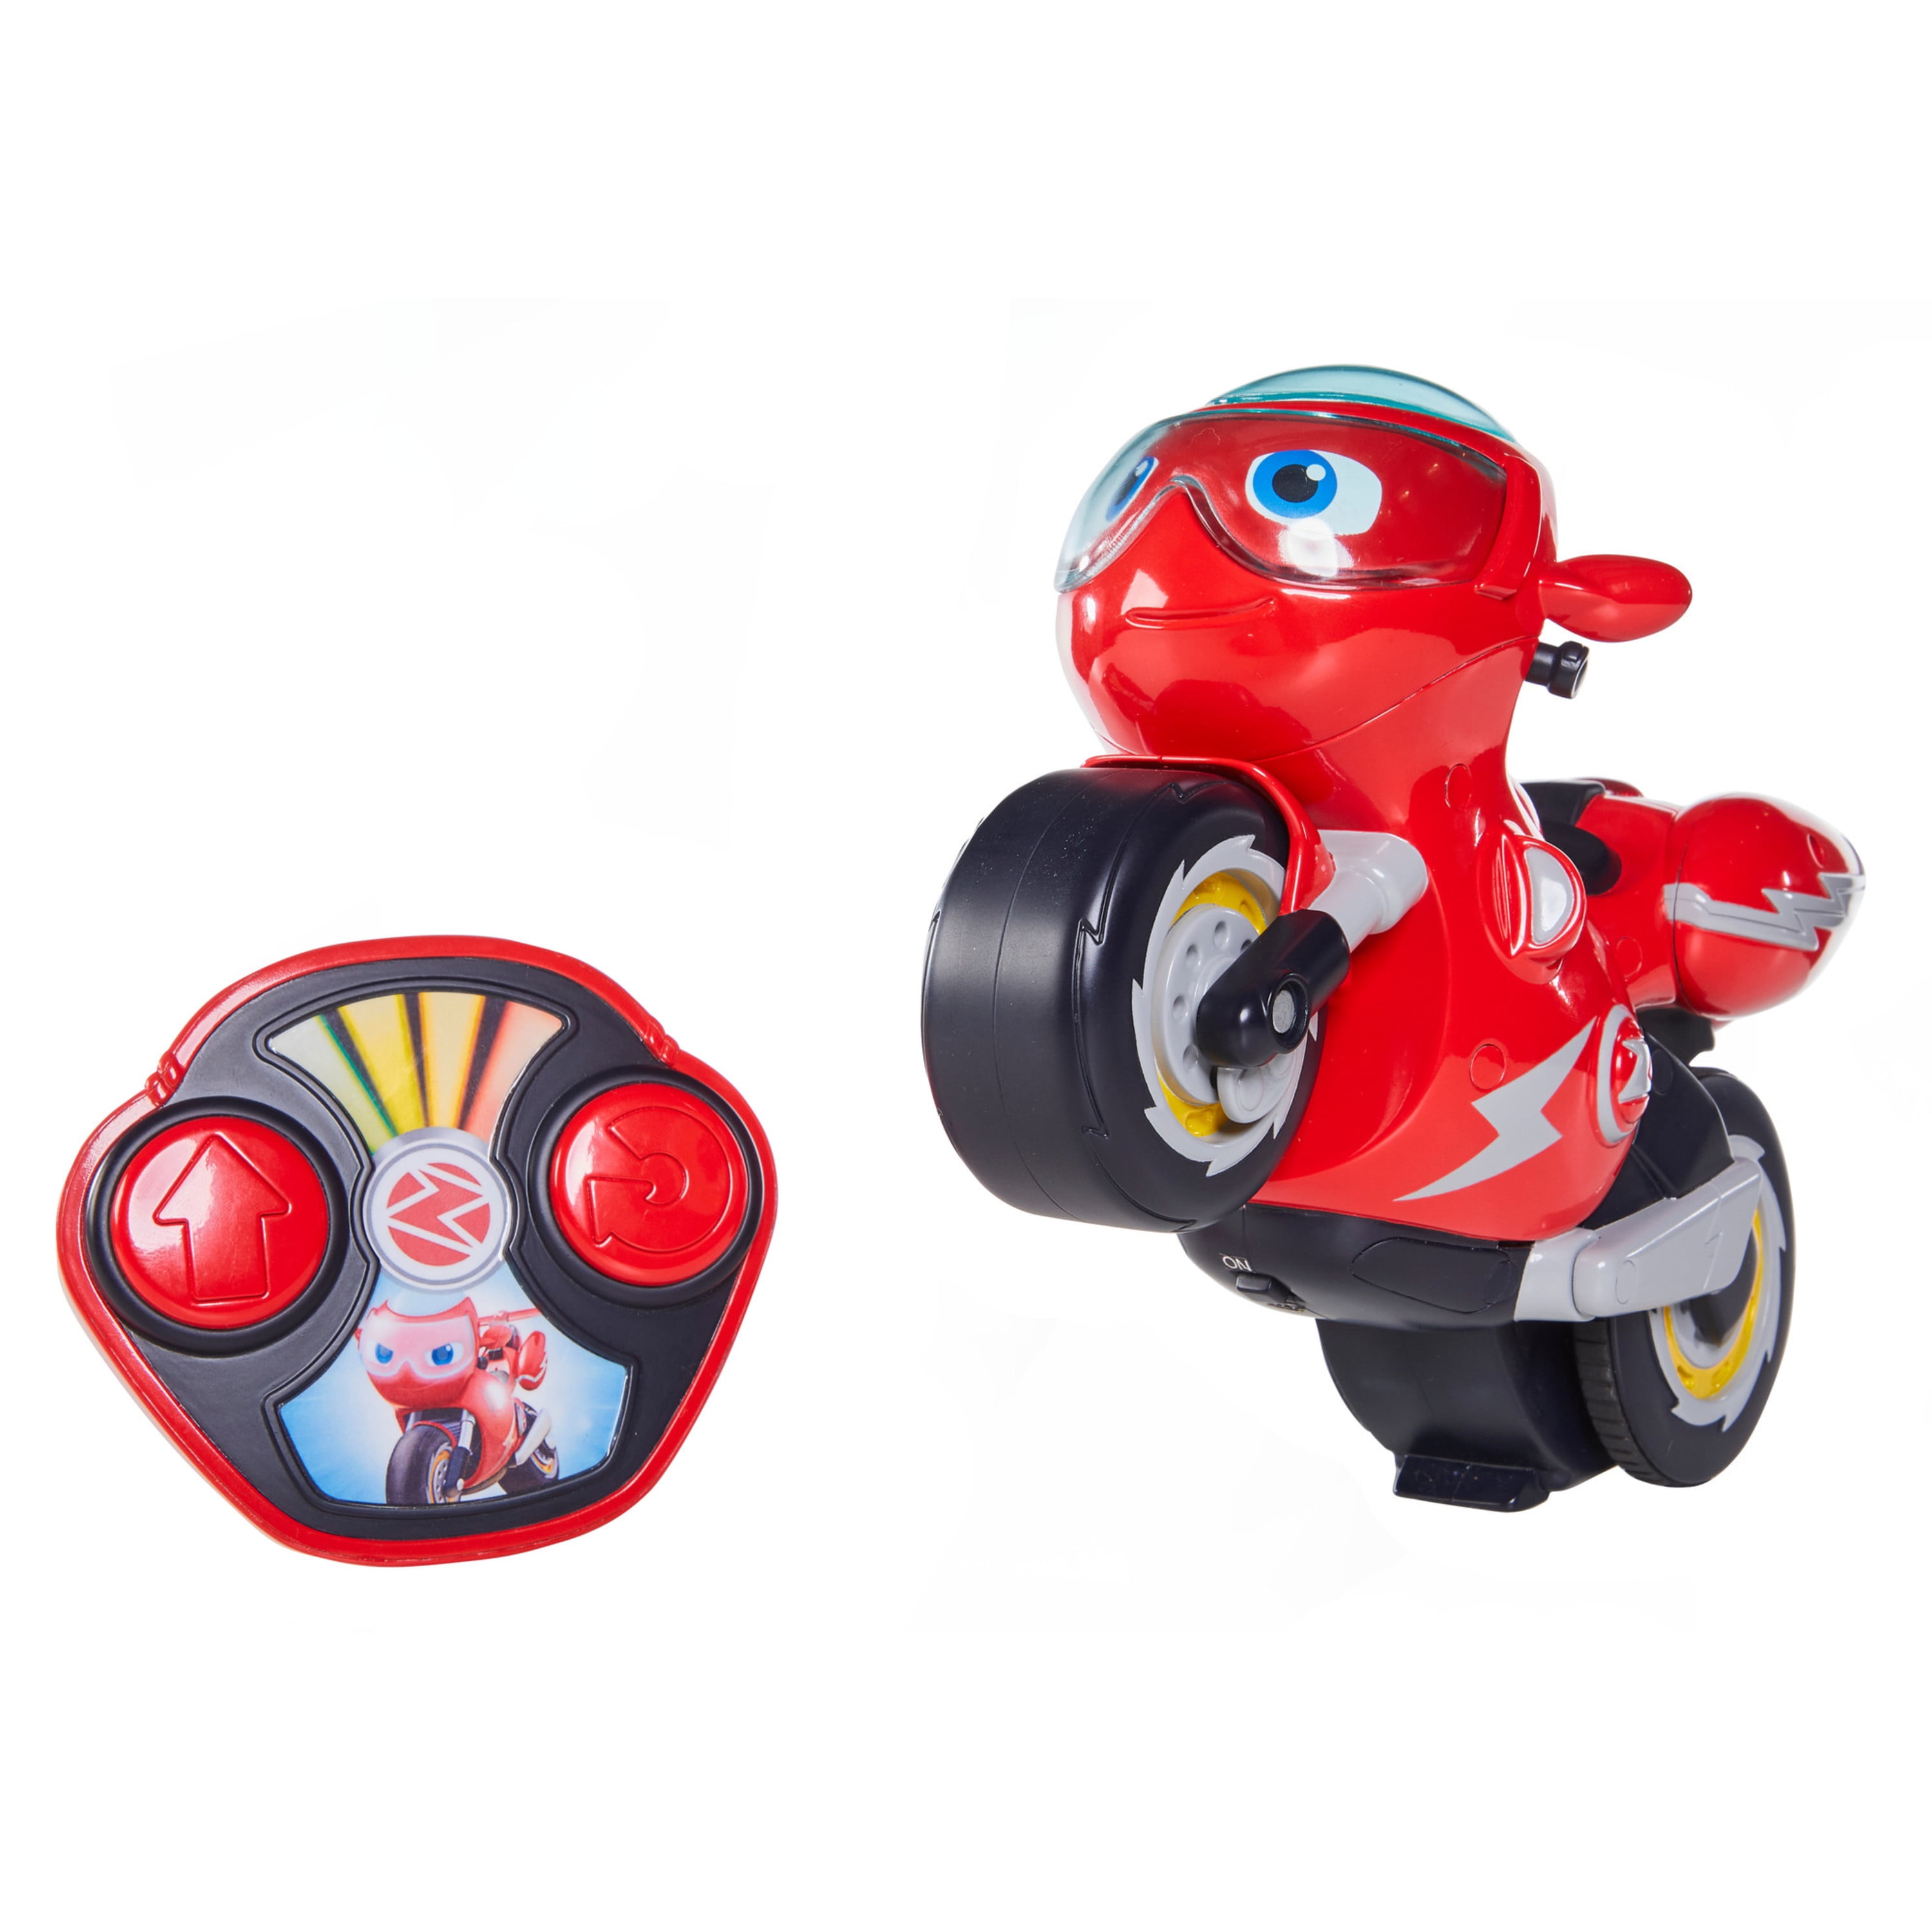 HQ Baby Kids Motorcycle Model Educational Toys Fashion Toys Car Gifts For Boys 